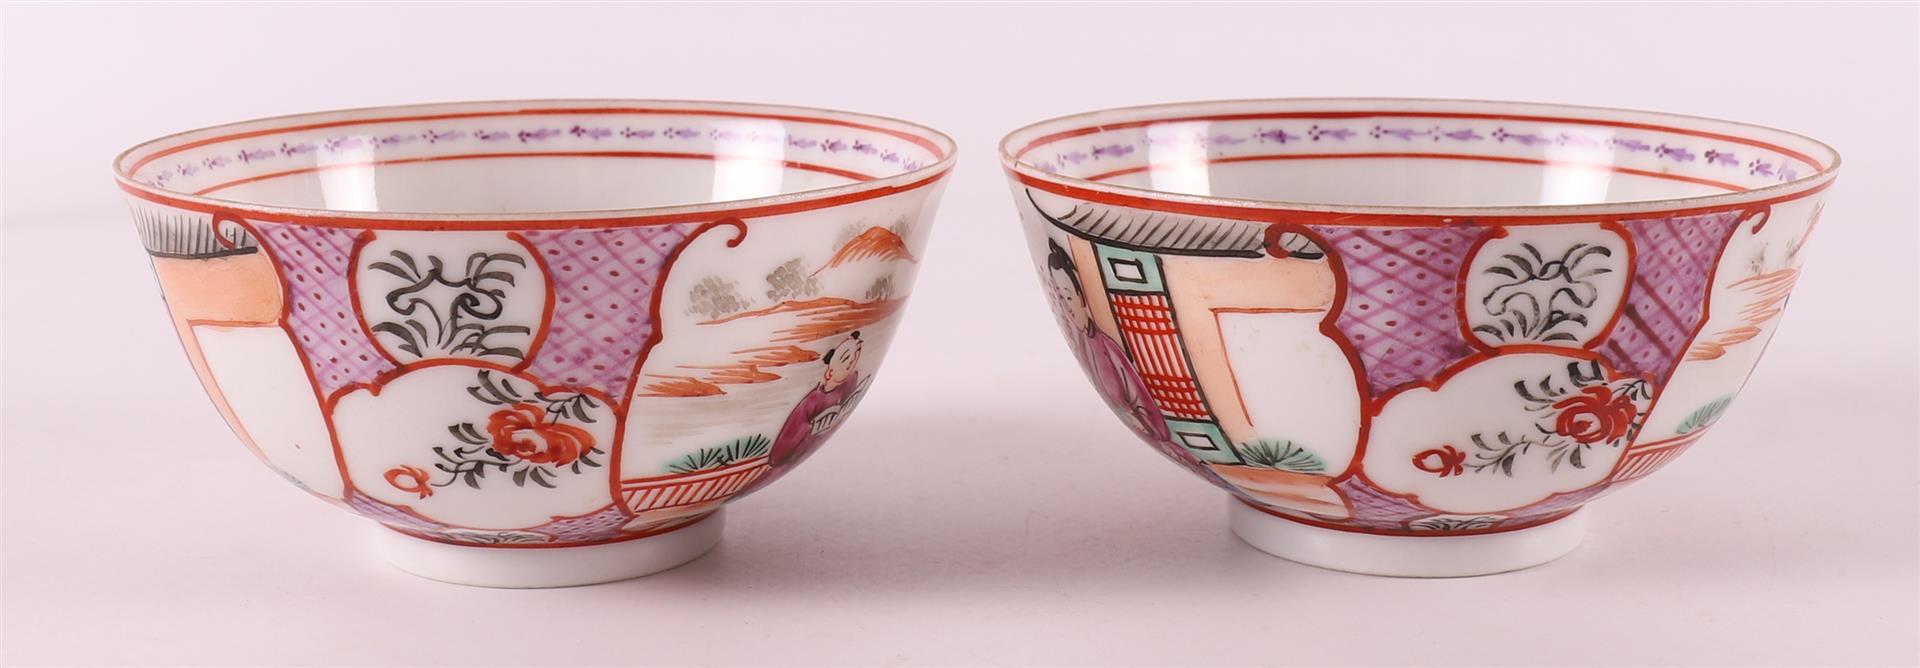 Two porcelain famille rose mandarin cups and saucers, 19th century. - Image 8 of 10